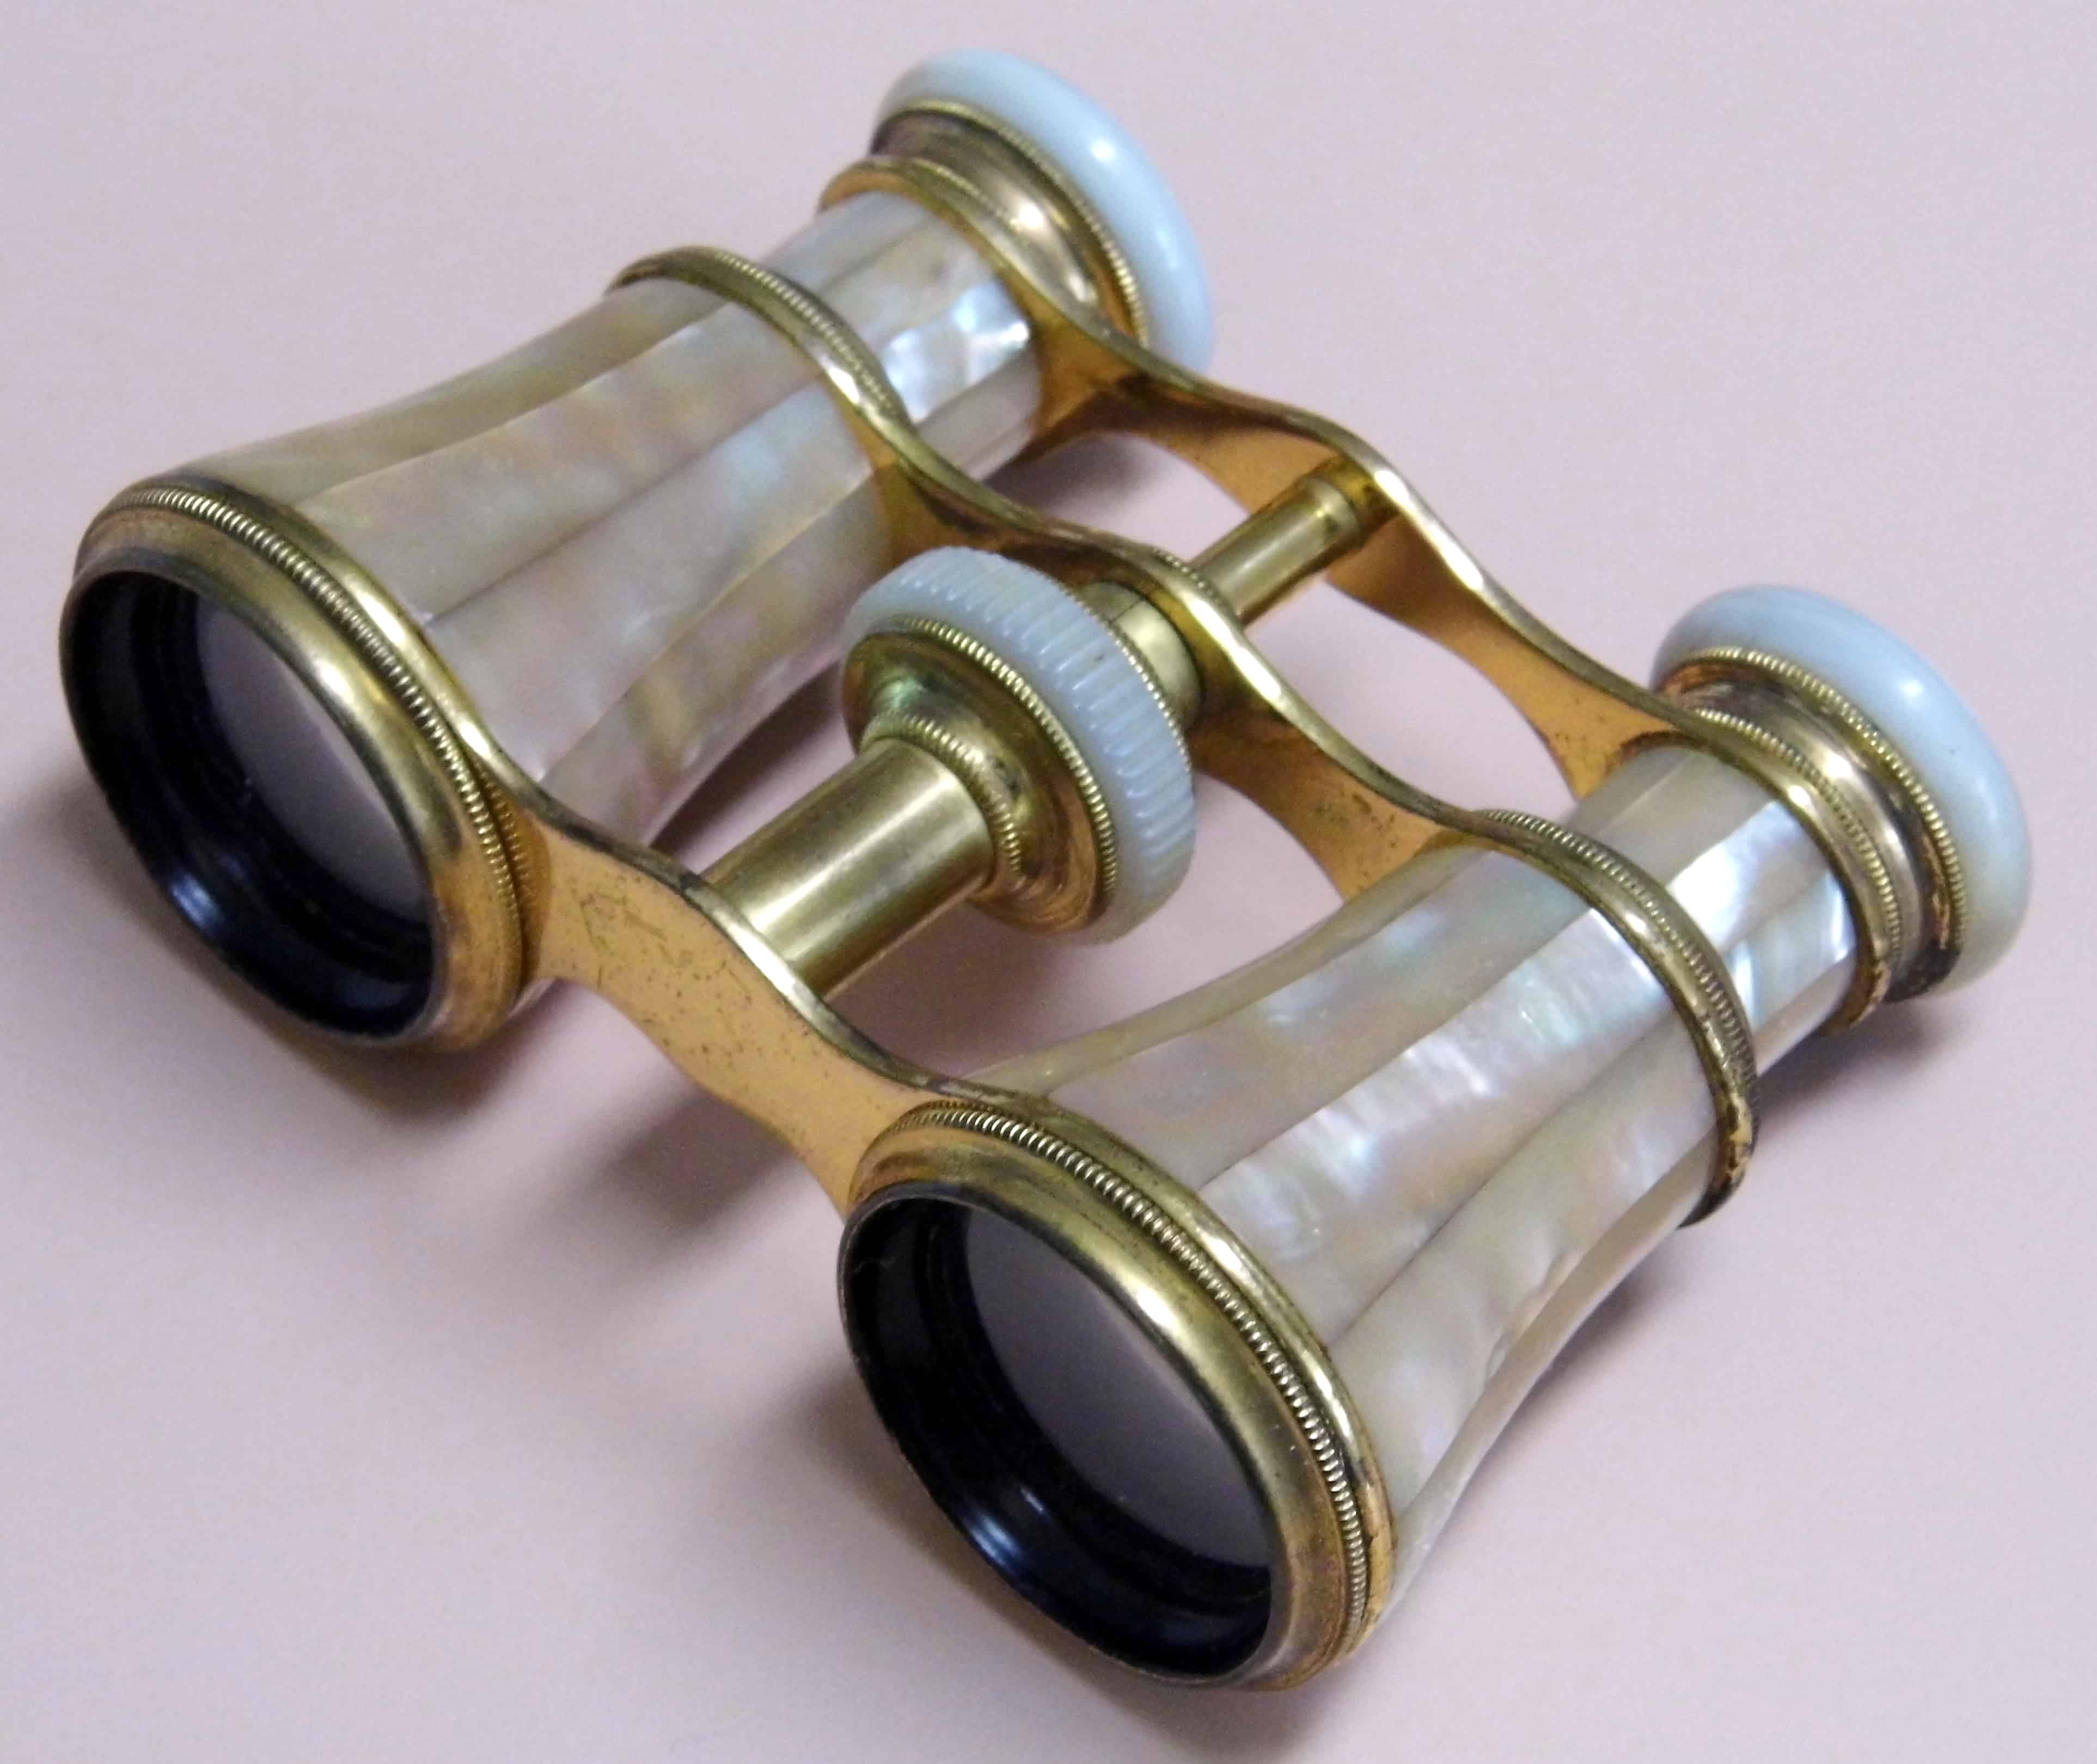 Mother of Pearl Opera Glasses © Wikimedia Commons